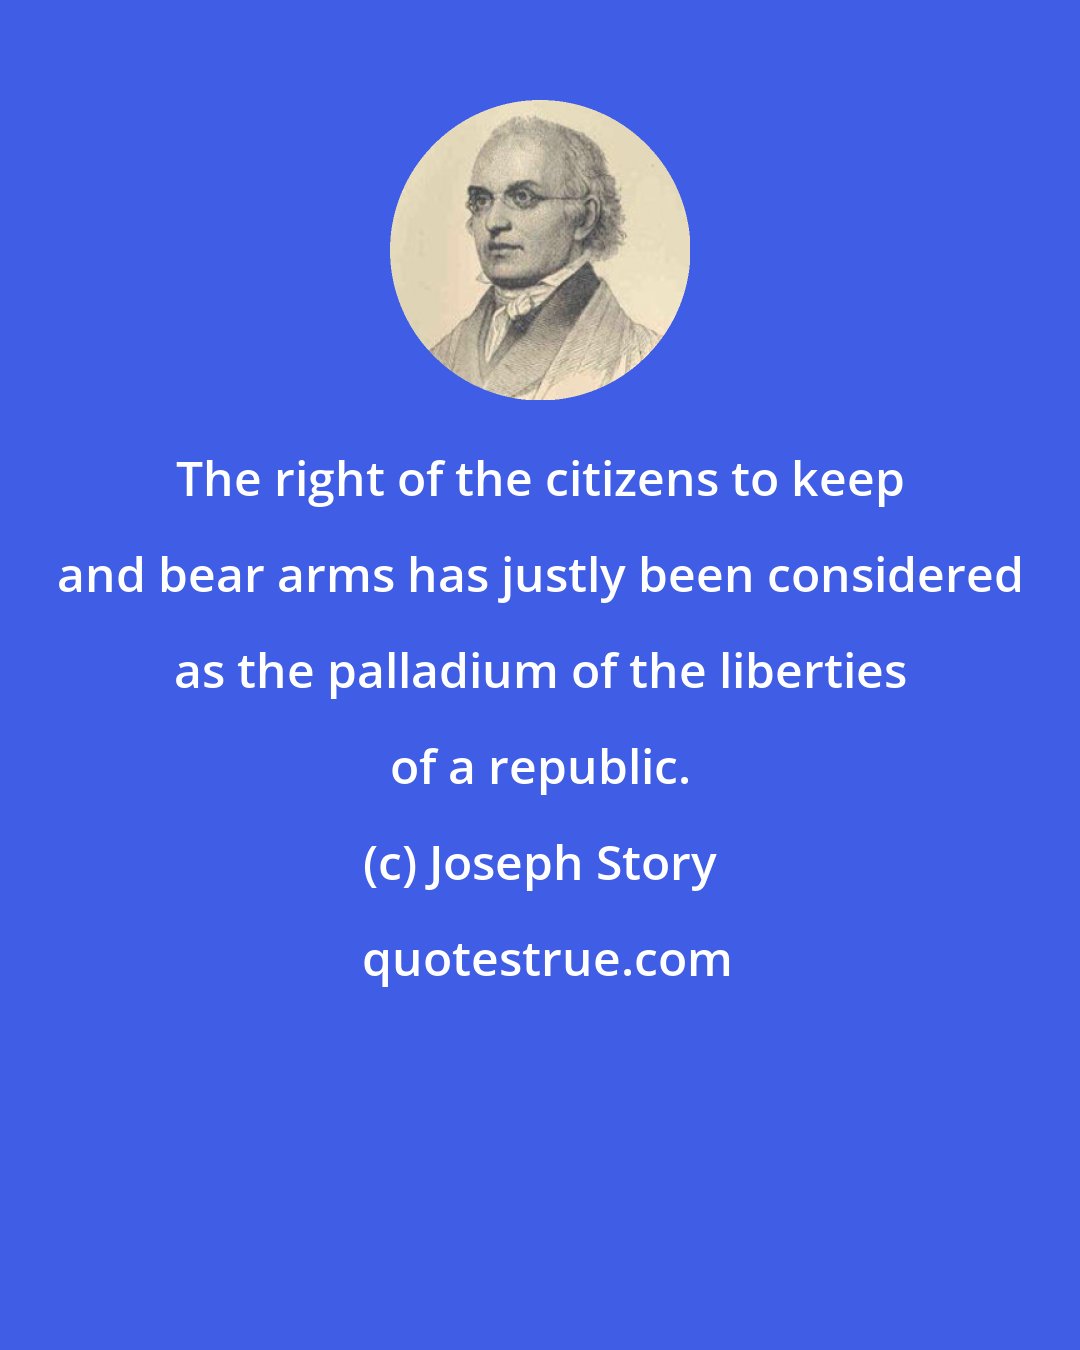 Joseph Story: The right of the citizens to keep and bear arms has justly been considered as the palladium of the liberties of a republic.